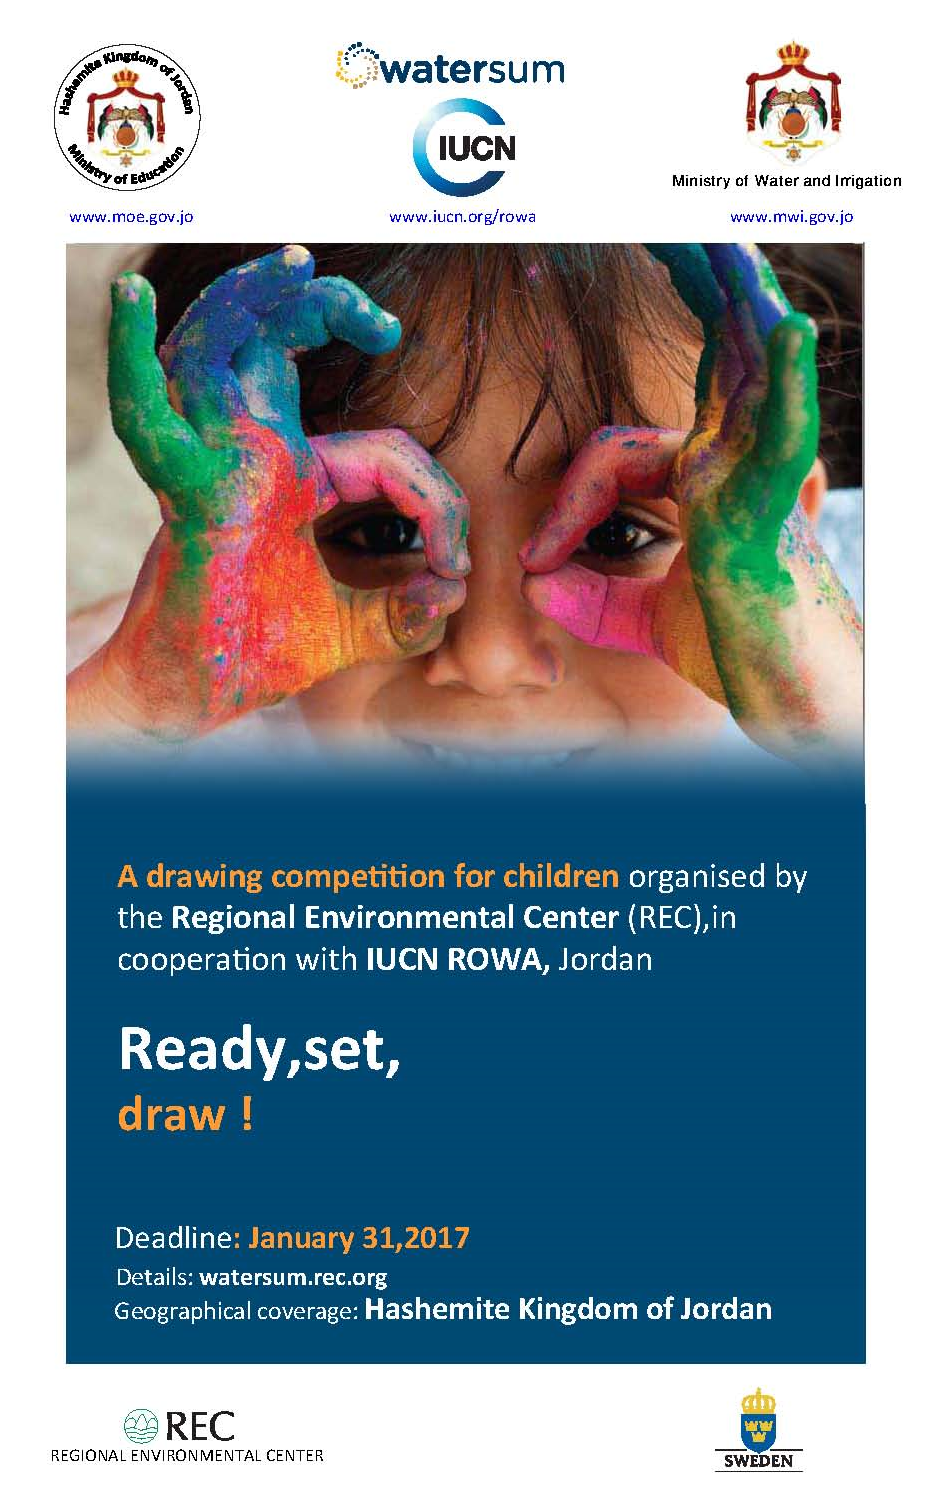 Take part in the WATER SUM drawing competition! | IUCN